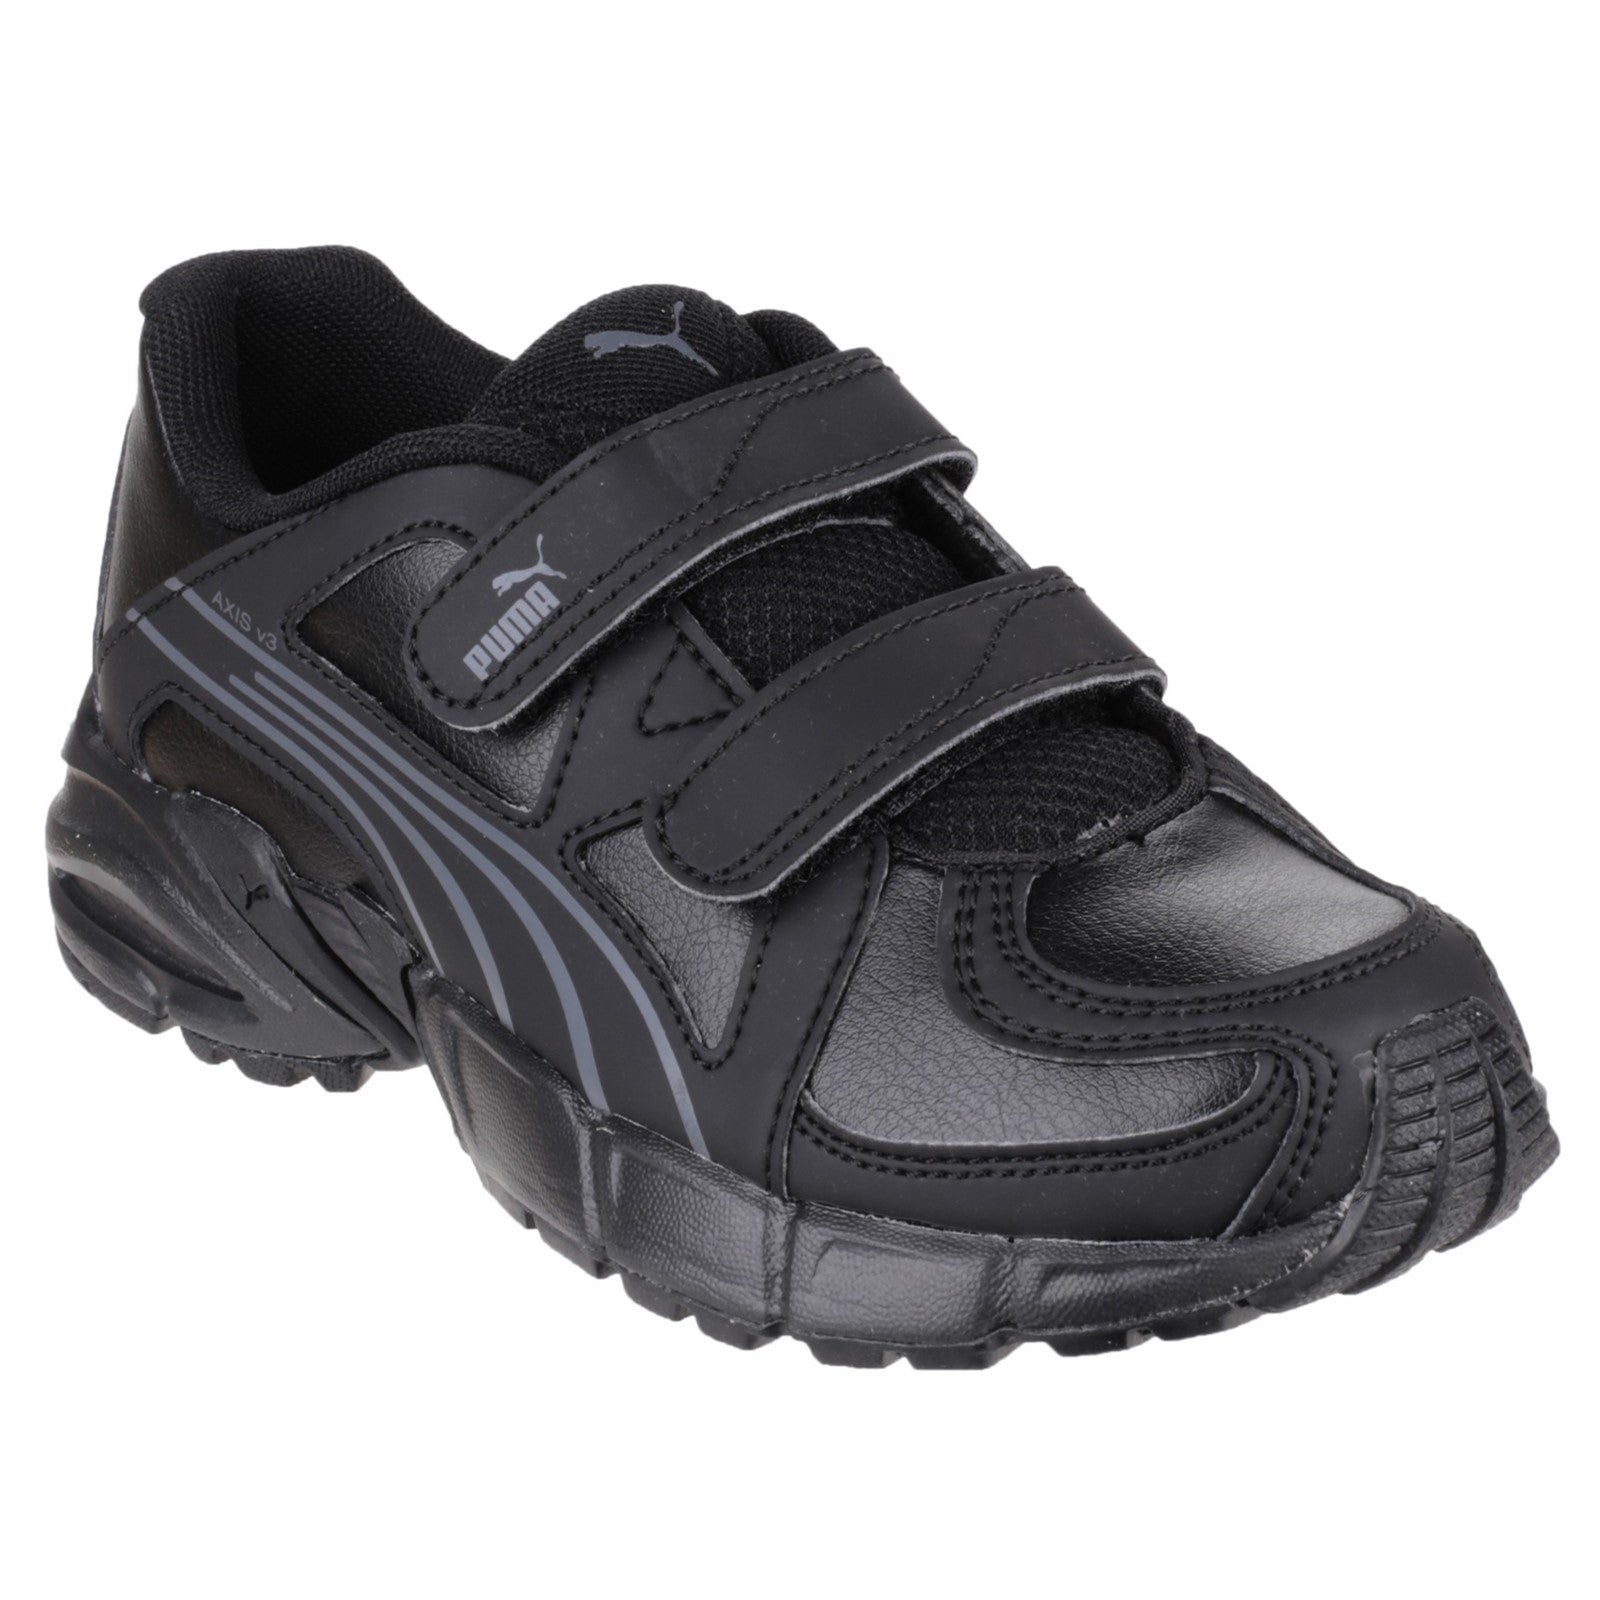 Puma Axis V3 Touch Fastening Childrens Shoe